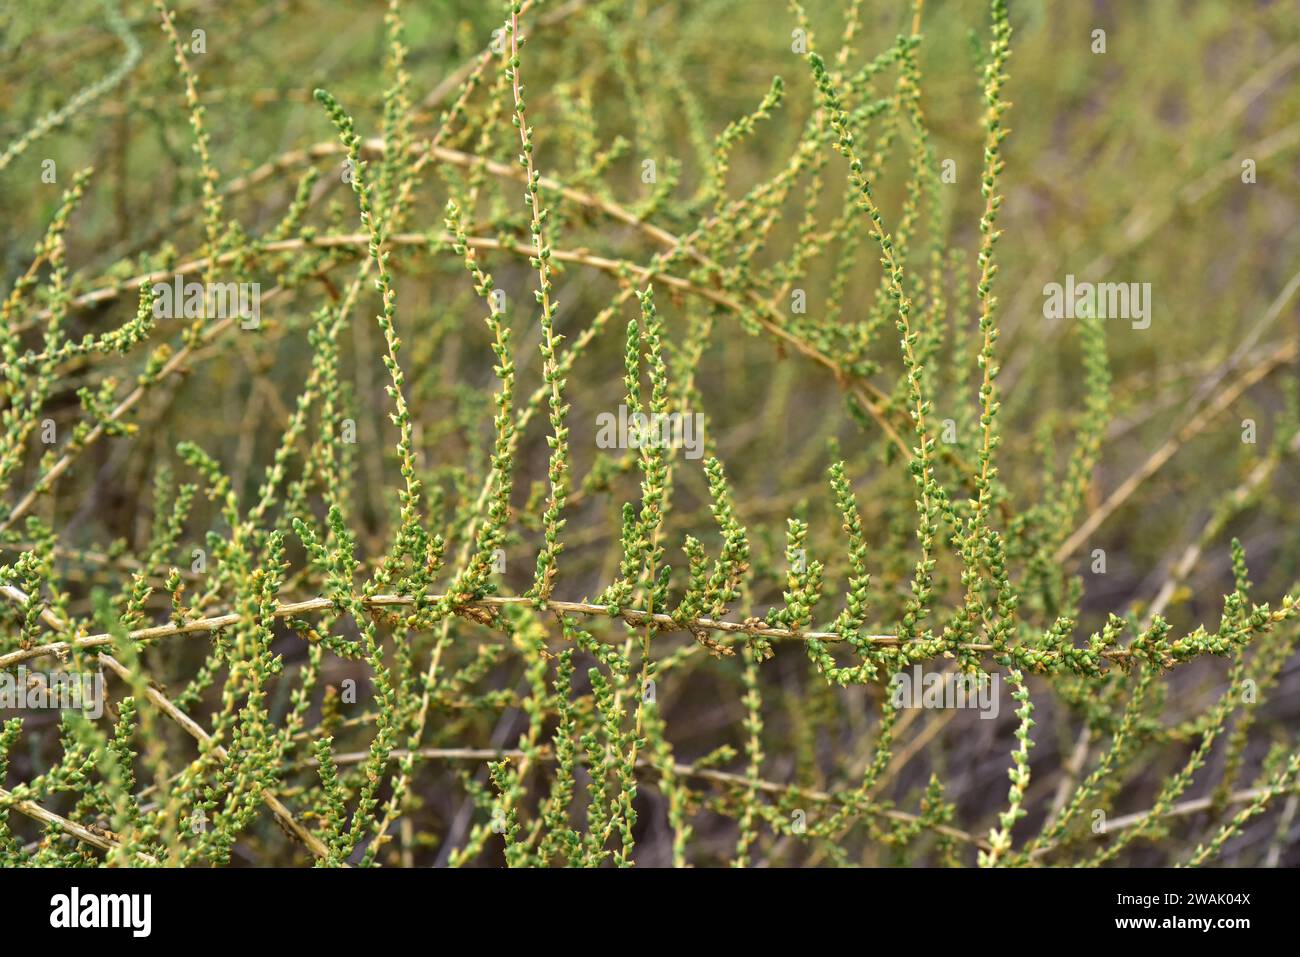 Mediterranean saltwort (Salsola vermiculata) is a shrub native to arids regions, southwestern Europe, north Africa and western Asia. This photo was ta Stock Photo